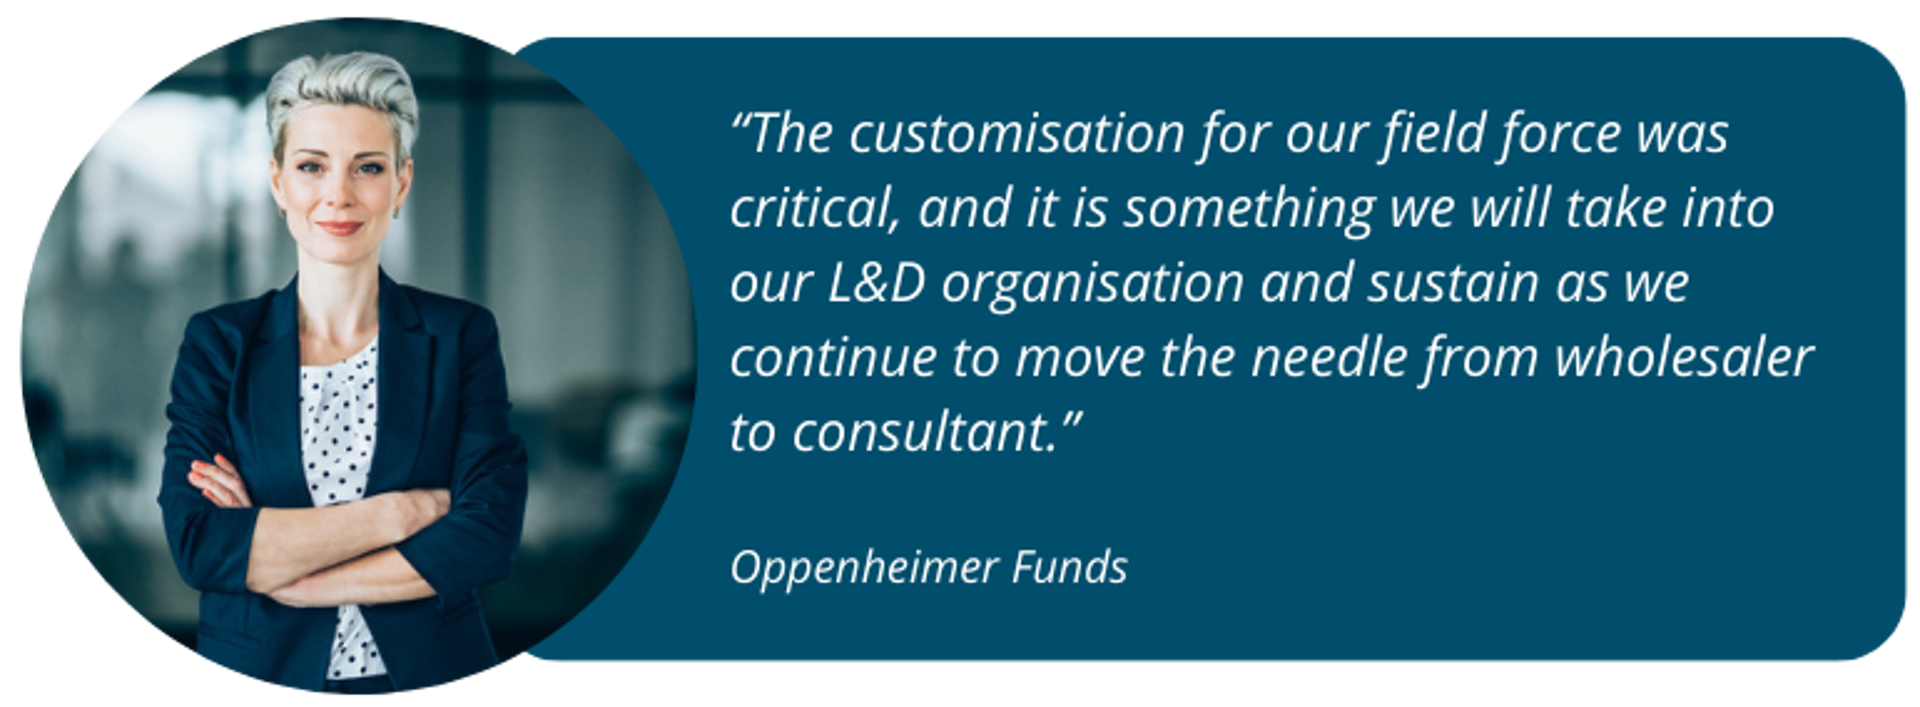 financial-services-sales-training-client-testimonial-oppenheimer-funds-global.png